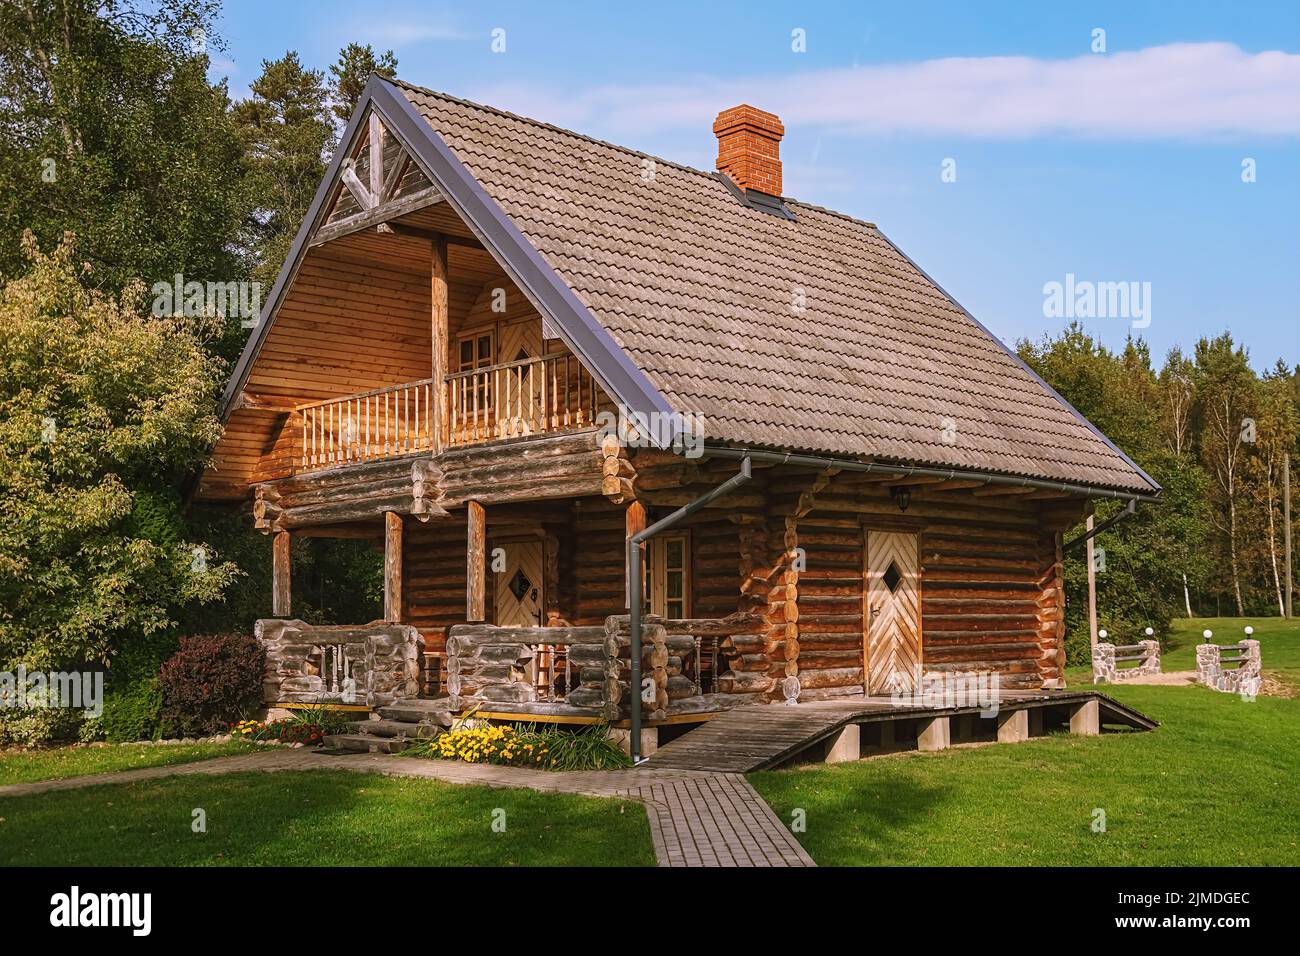 Wooden house in a rural area Stock Photo